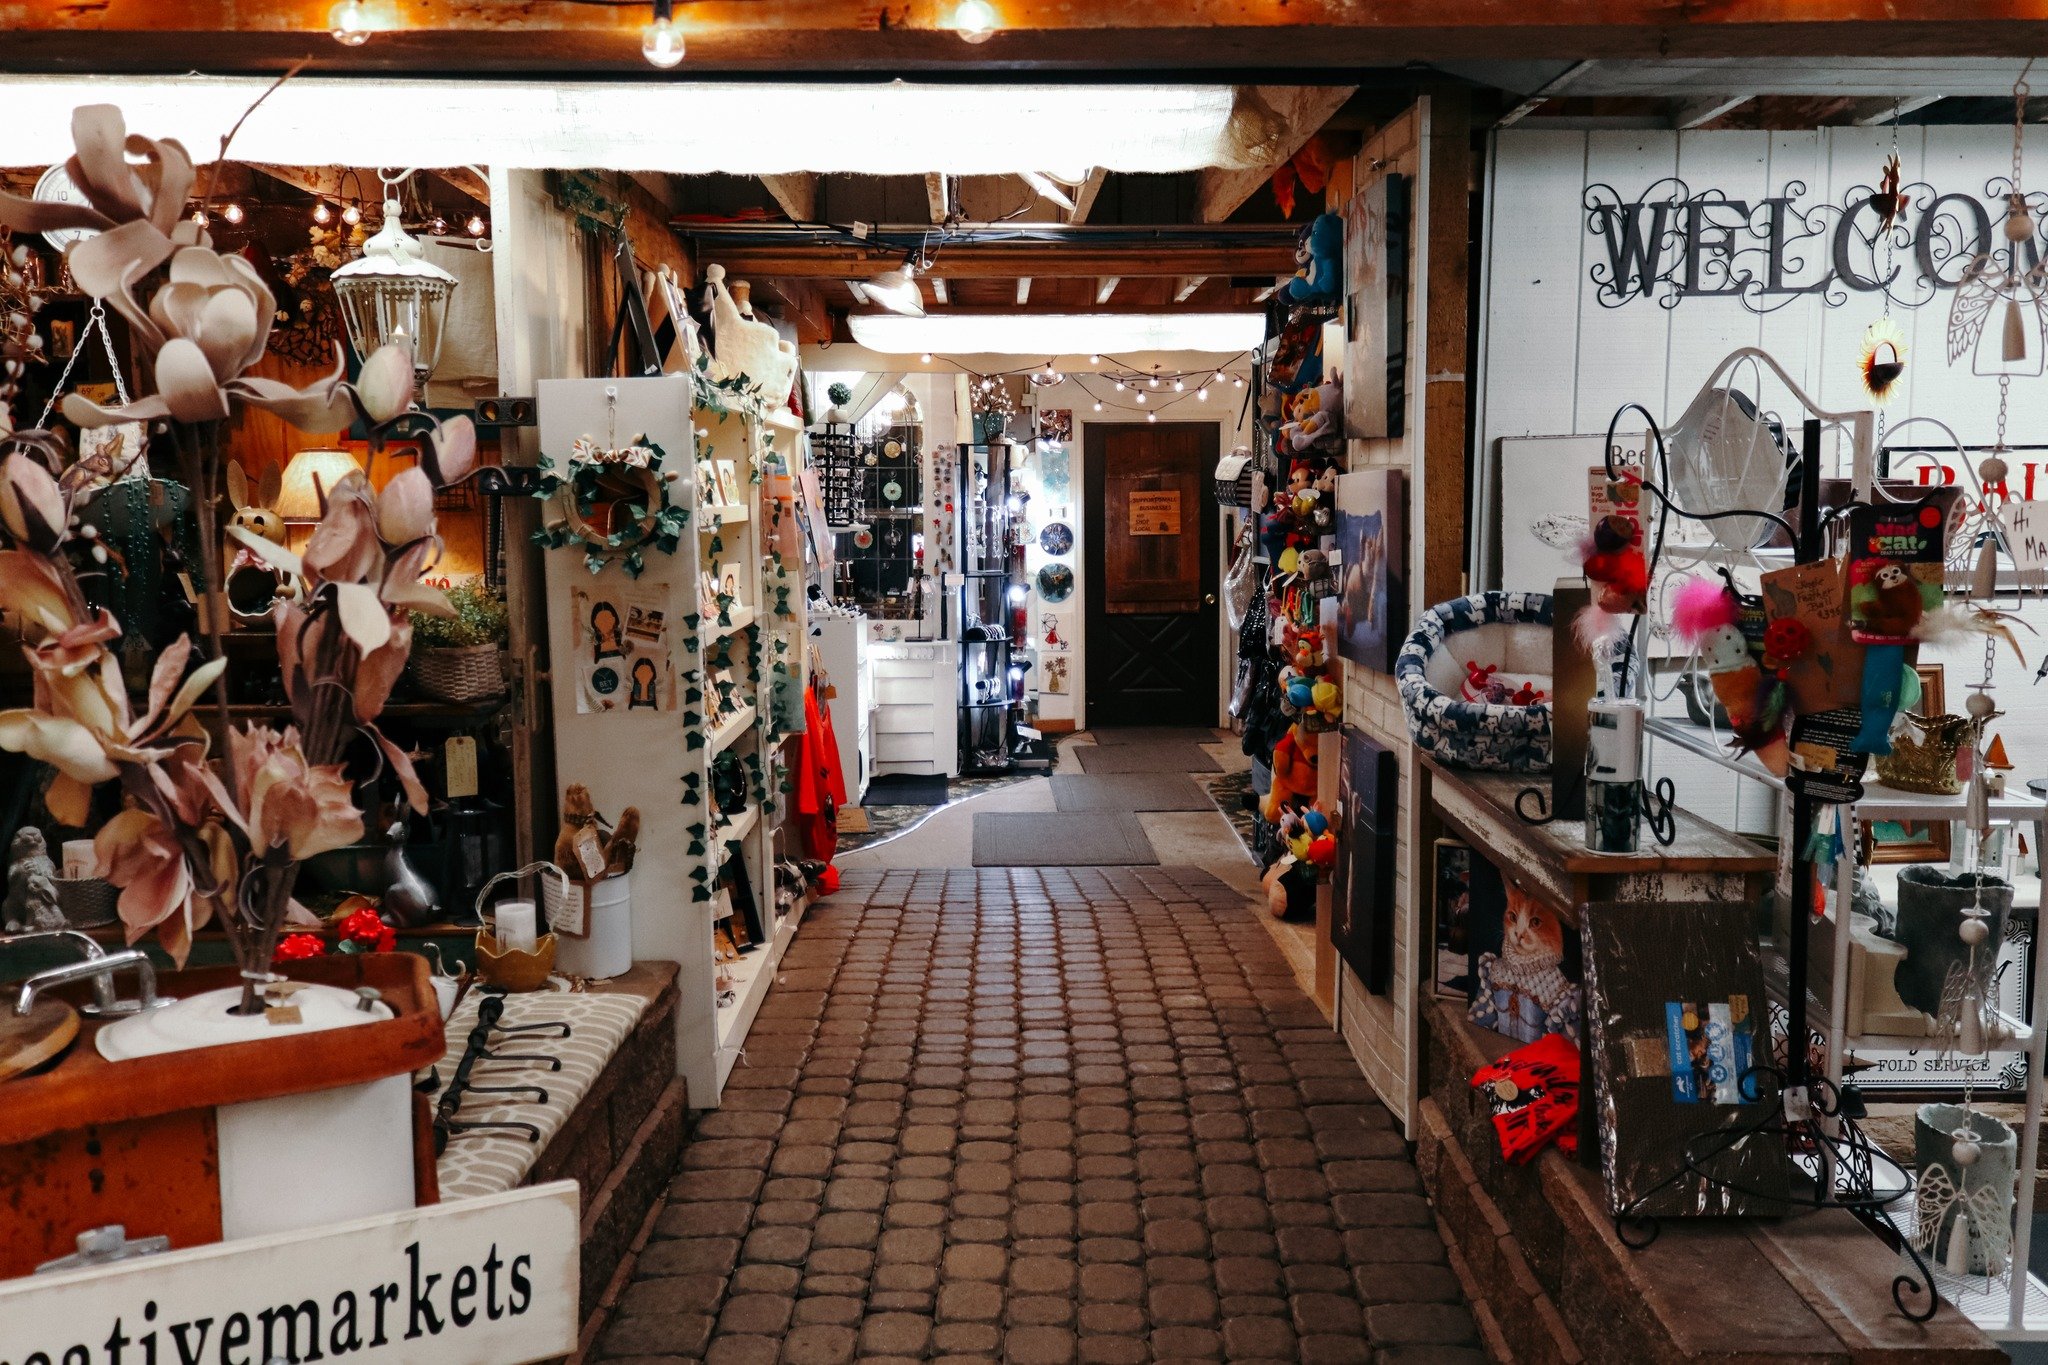 GRAB THEM A GIFT CERTIFICATE!

Need a creative gift idea for your friend or family member? How about a @prestigecreativemarkets gift certificate?! They'll be able to browse our 8,000 square foot rustic market featuring a ton of talented small shop ow